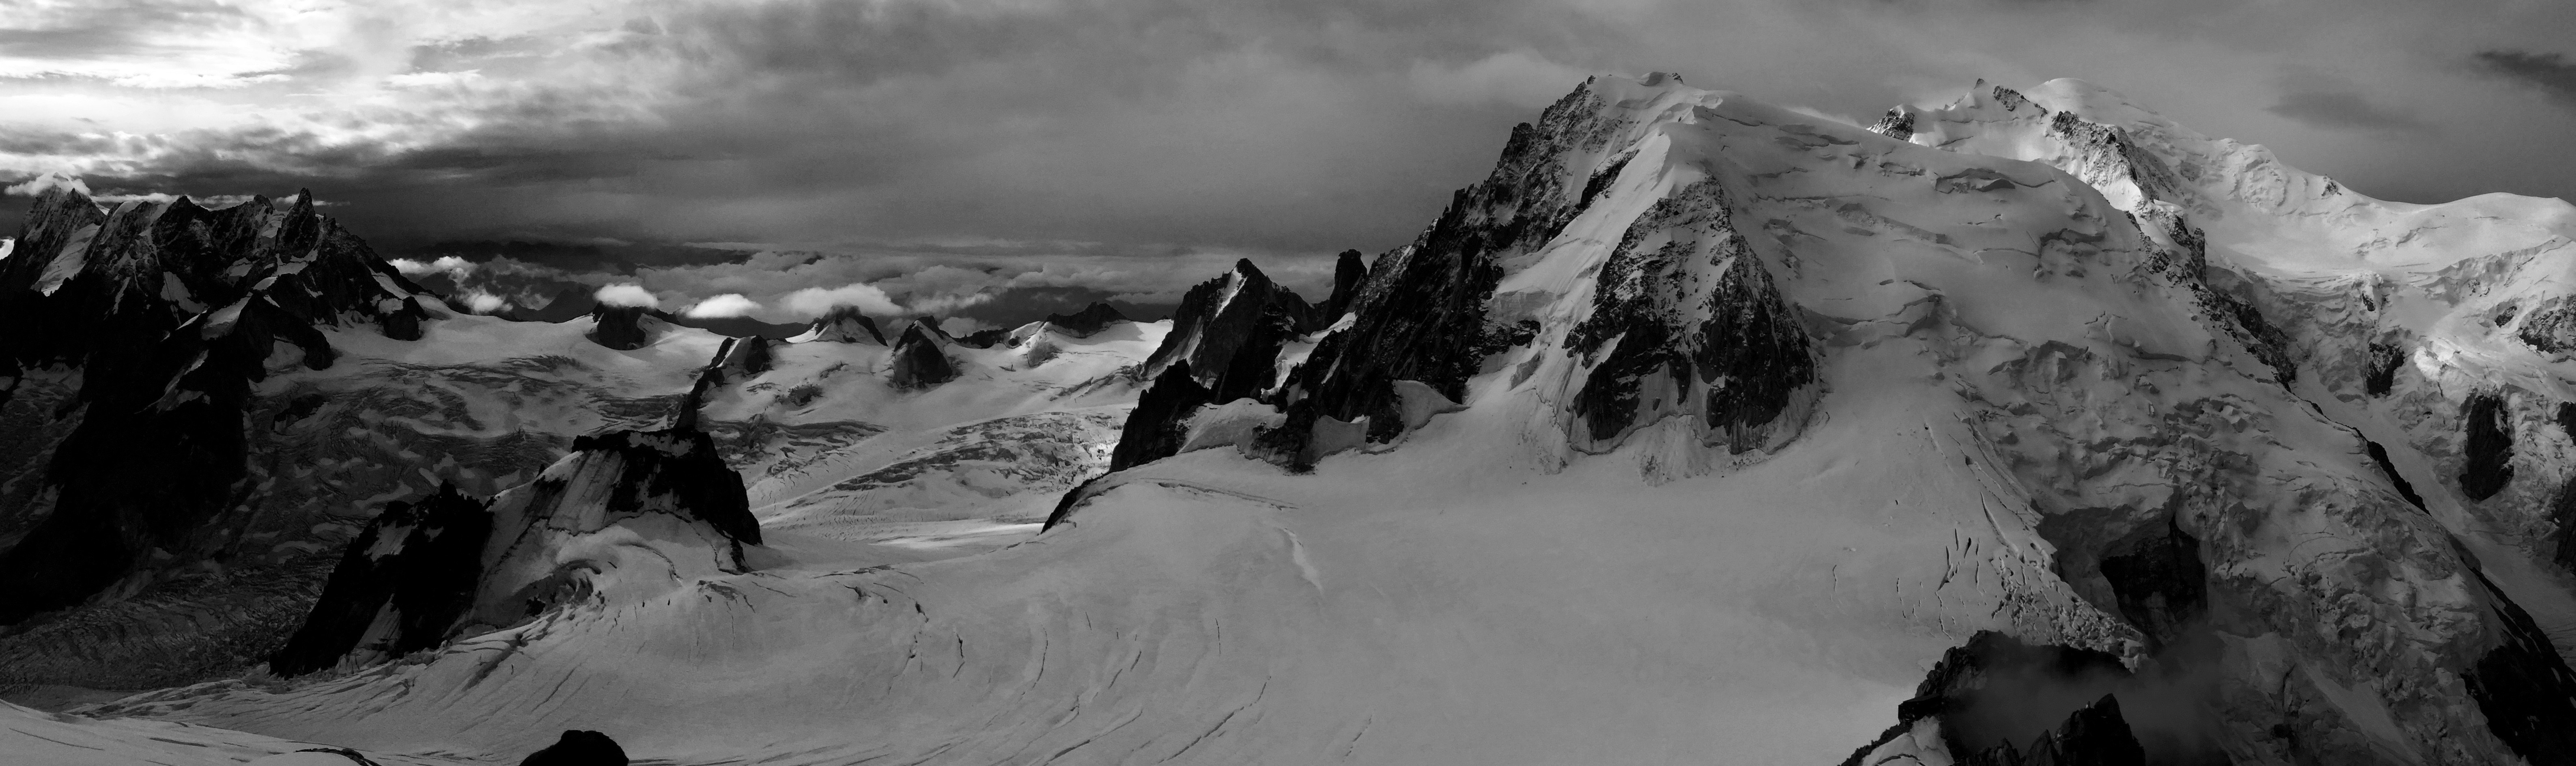 grayscale snow covered mountain